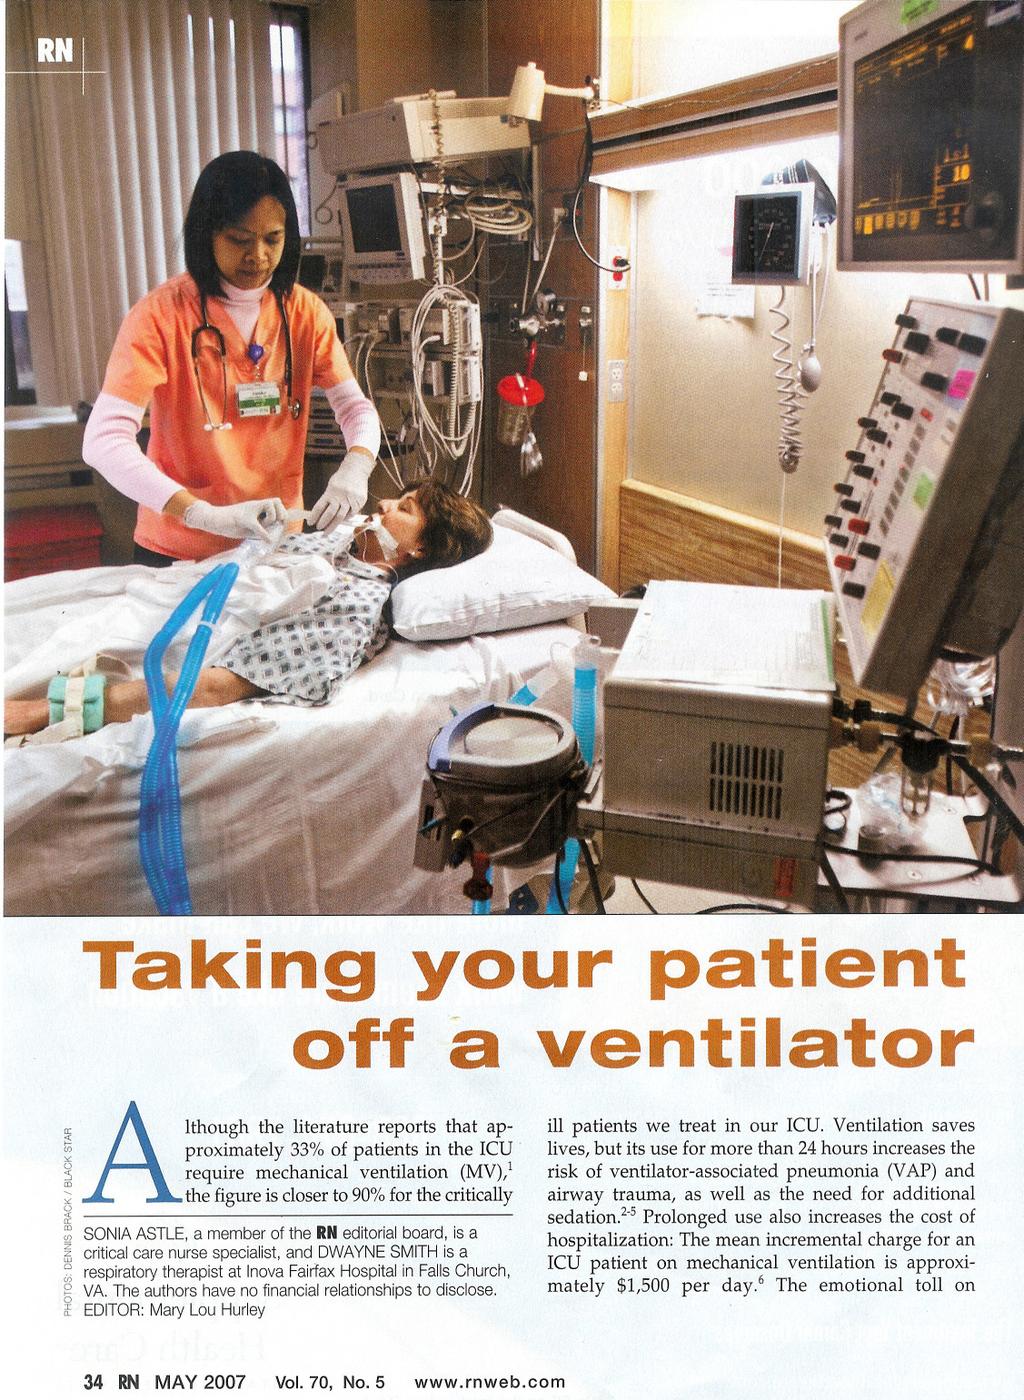 Taking your patient off a ventilator Although the literature reports that approximately 33% of patients in the ICU require mechanical ventilation (MV),!